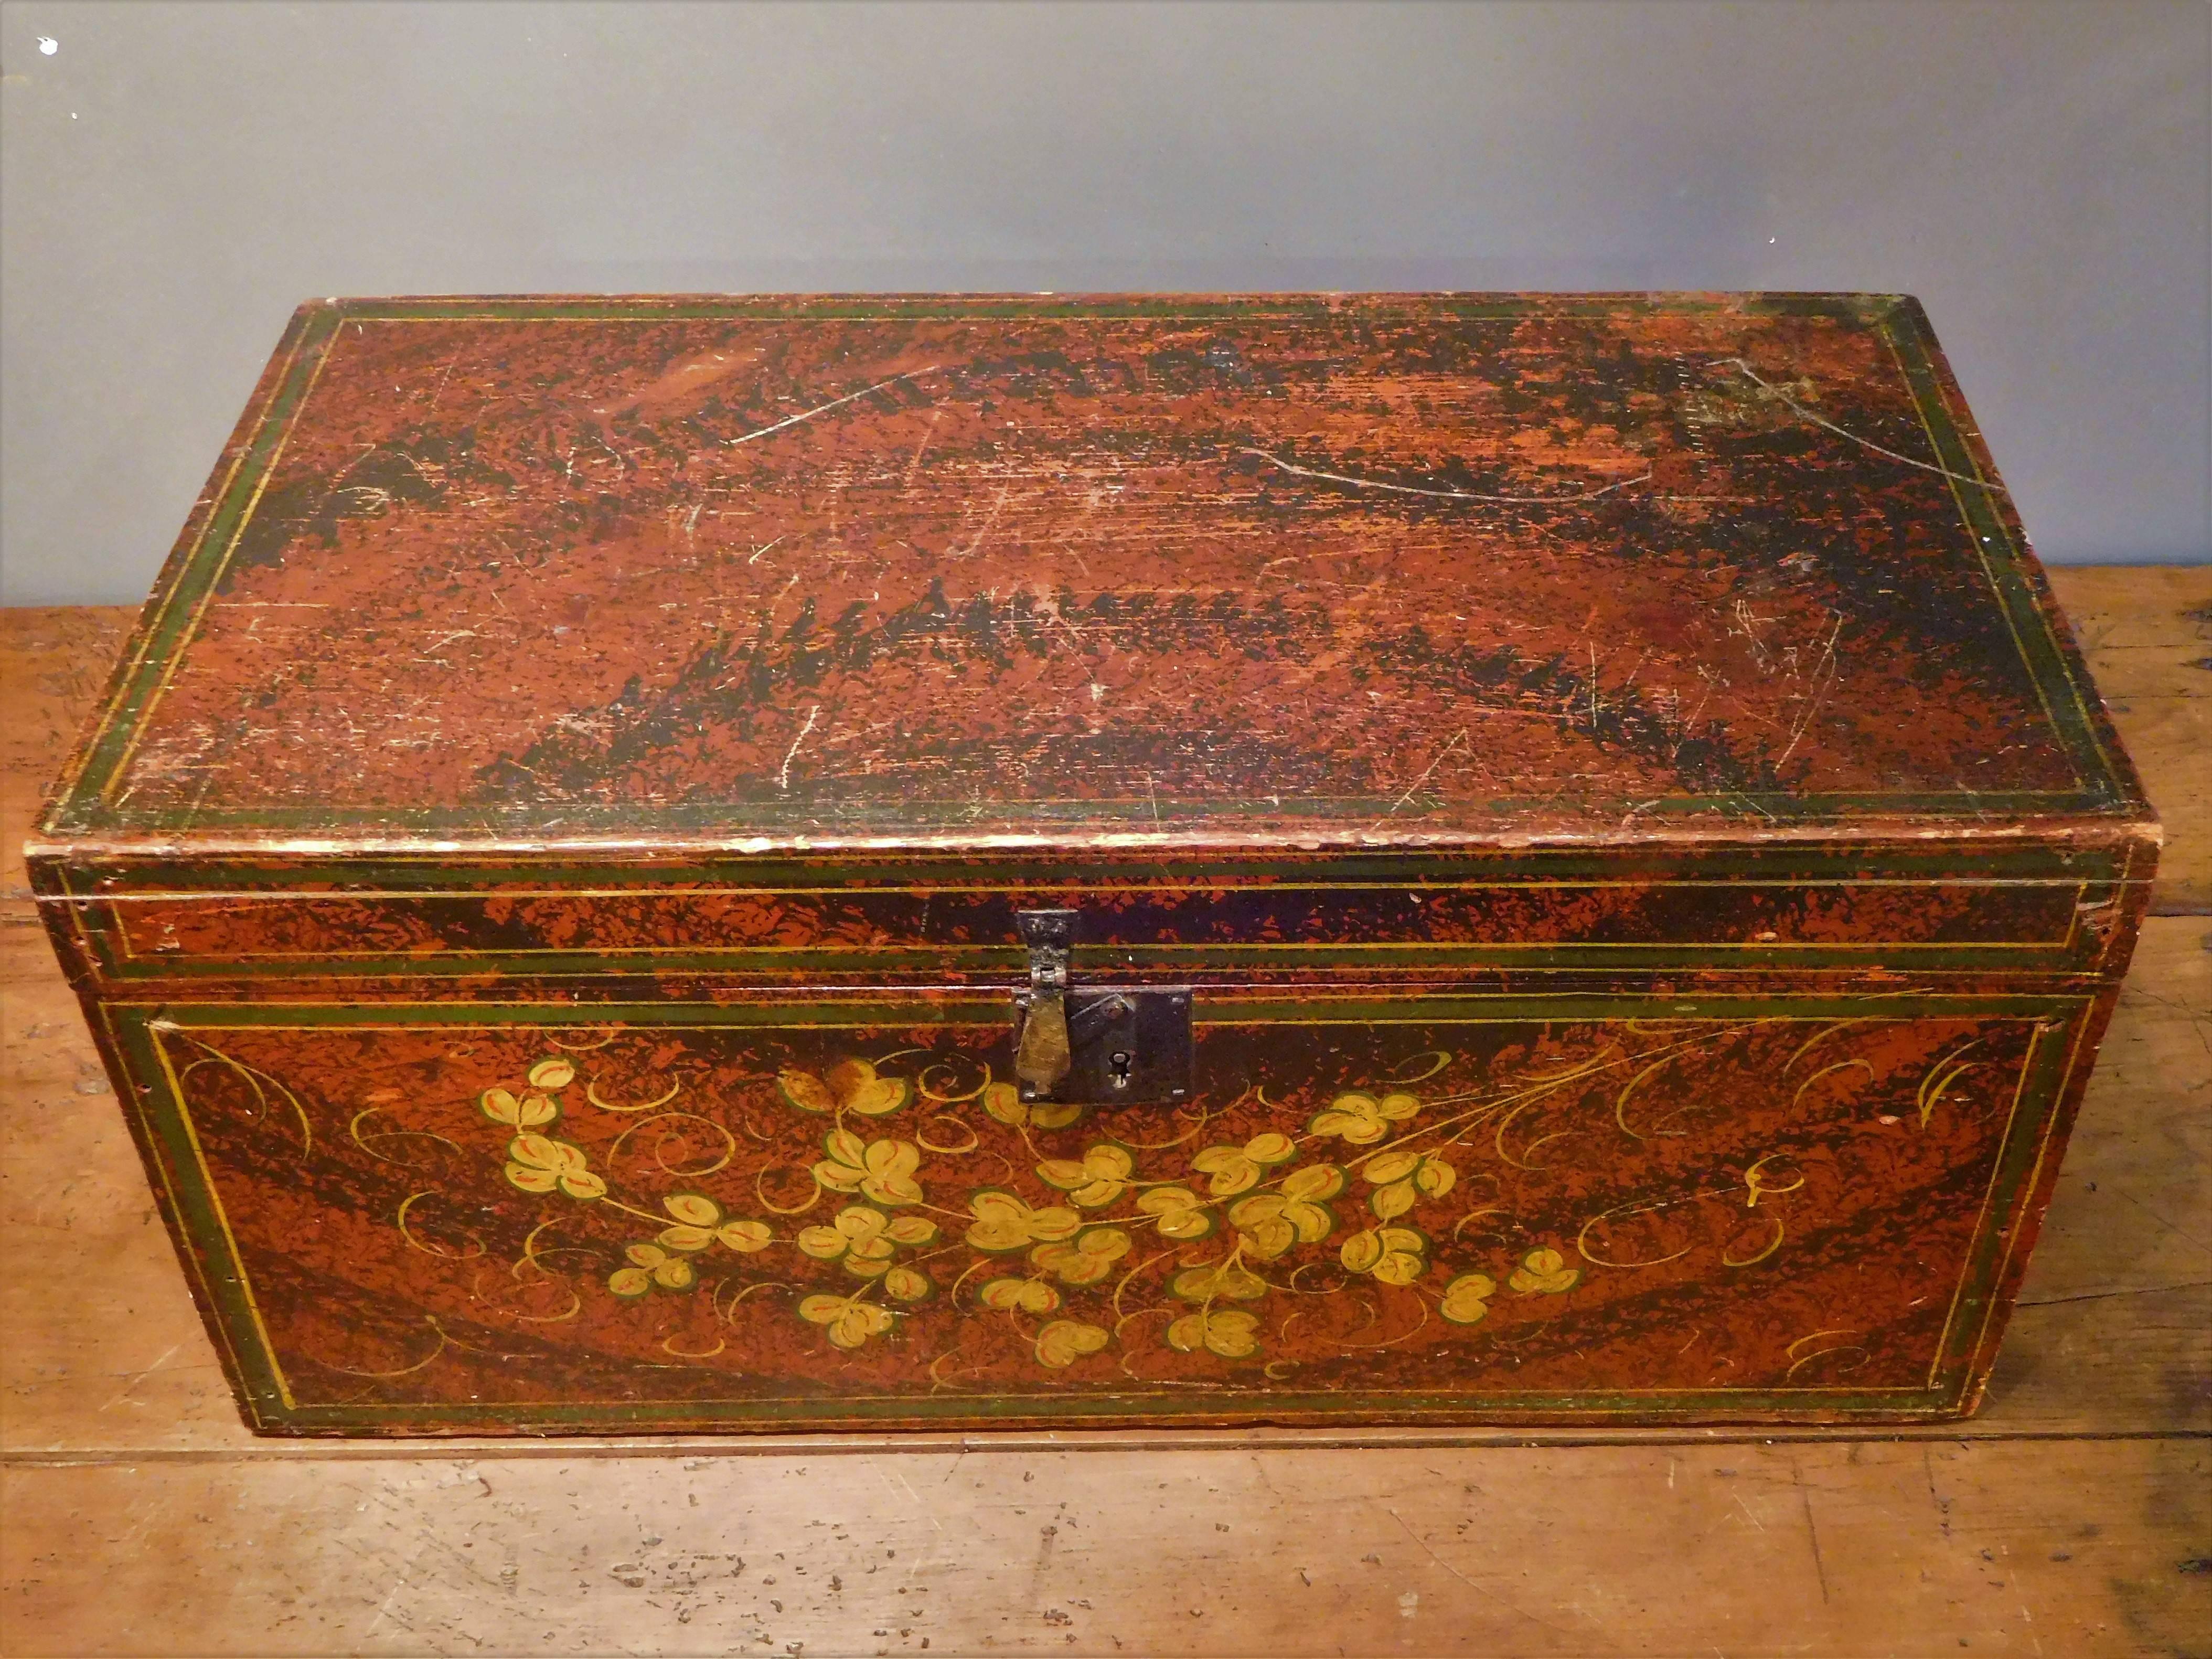 Decorated Storage or Document Box, New England Folk Art, Mid-19th Century For Sale 4